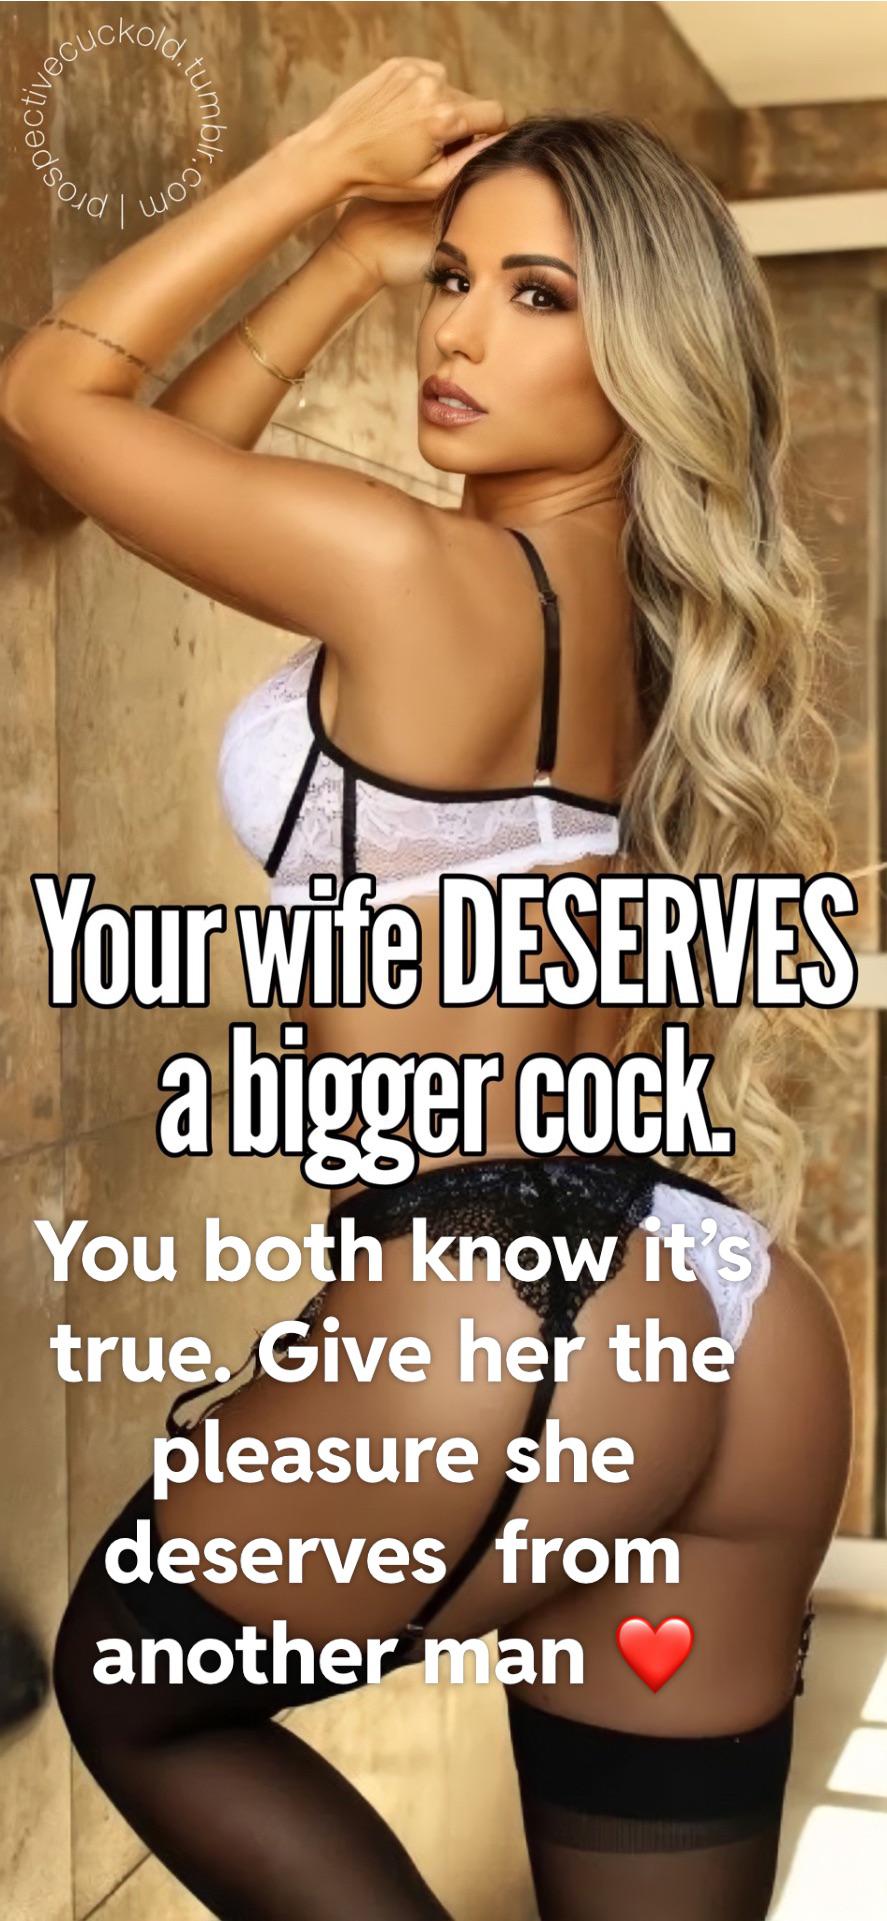 She’s deserves bigger Post By Xxx Sexy Suspicious_Bedroom69 on cuckoldcaptions